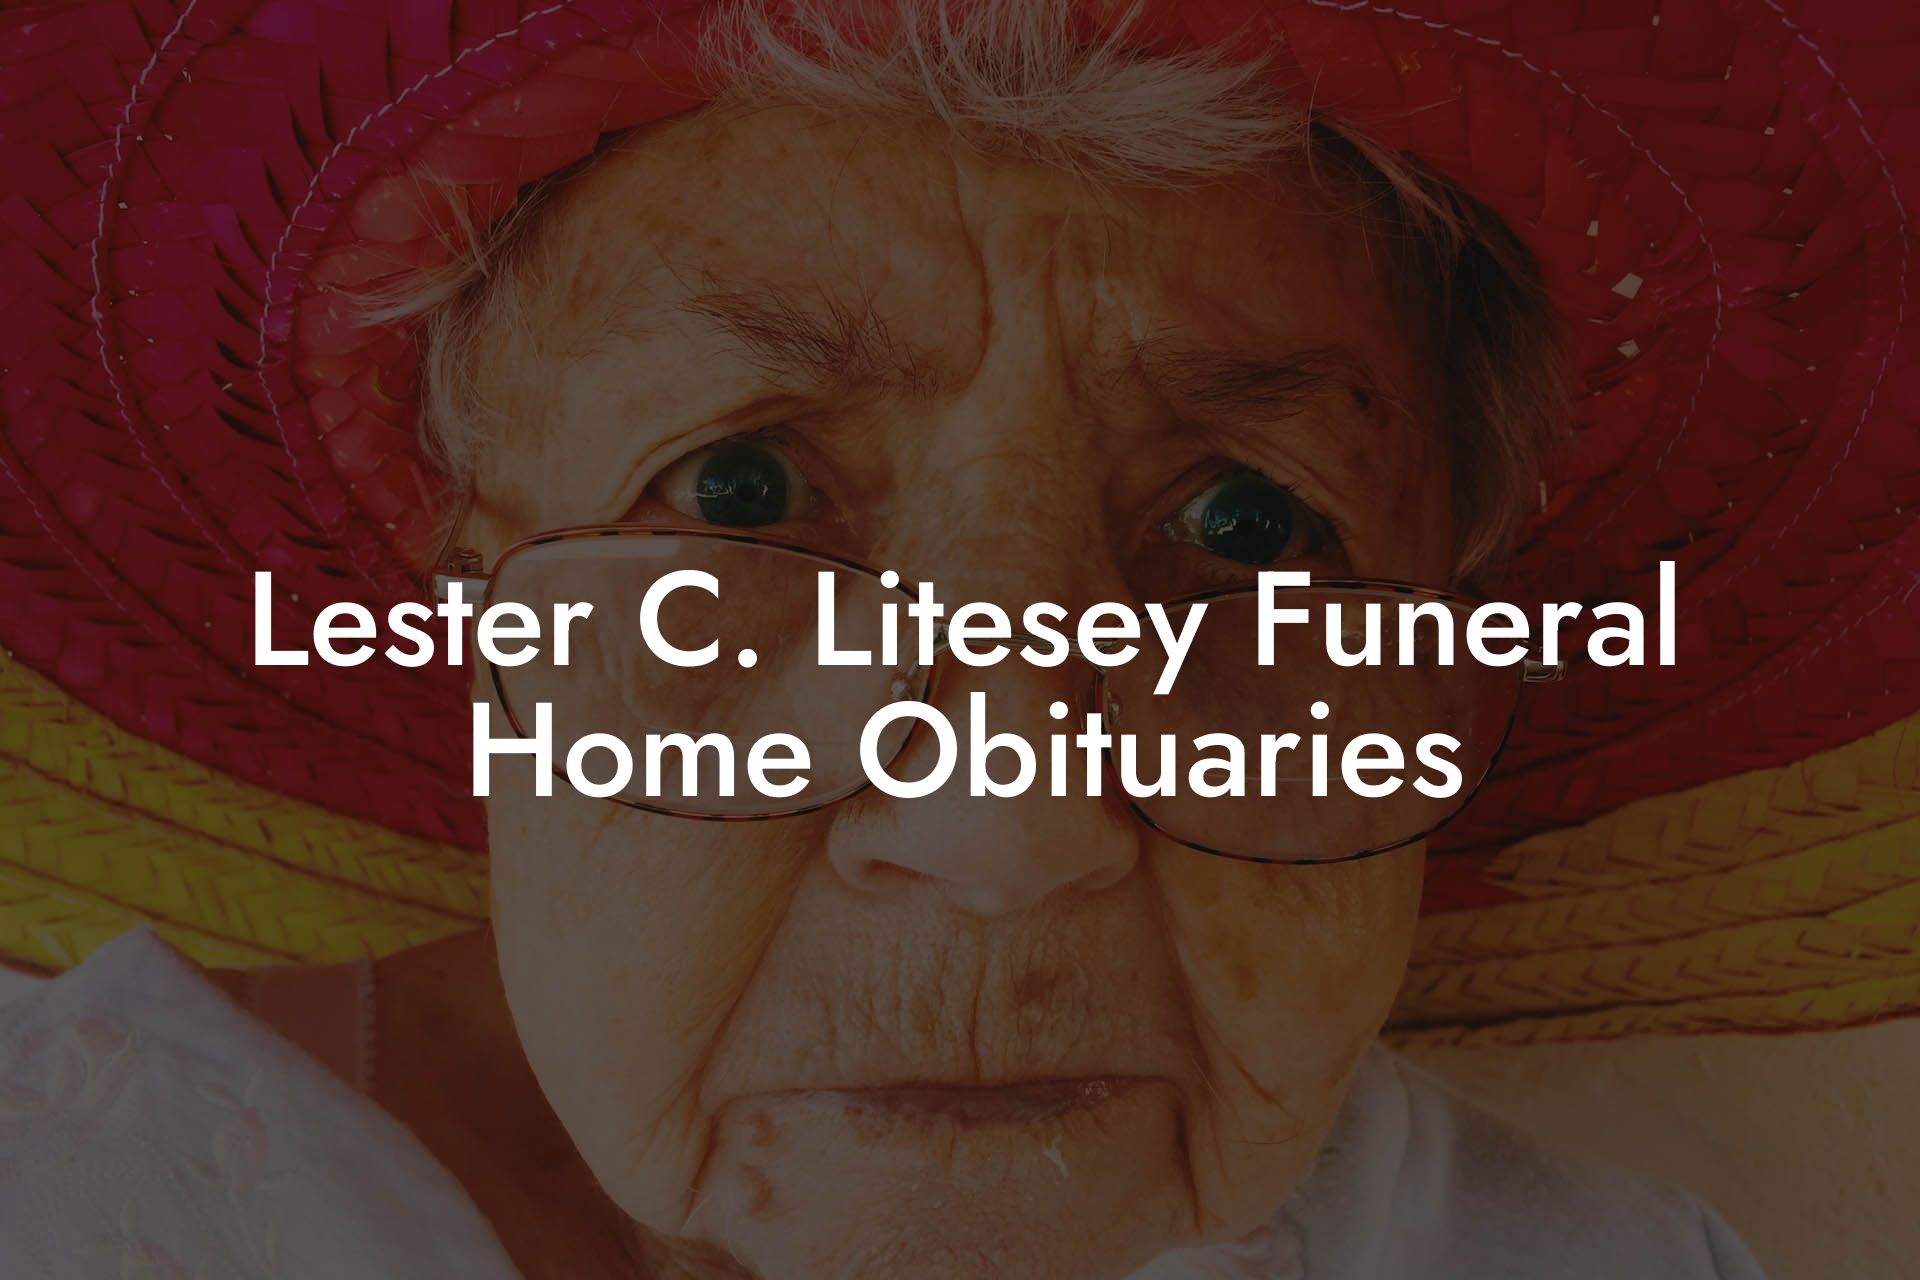 Lester C. Litesey Funeral Home Obituaries